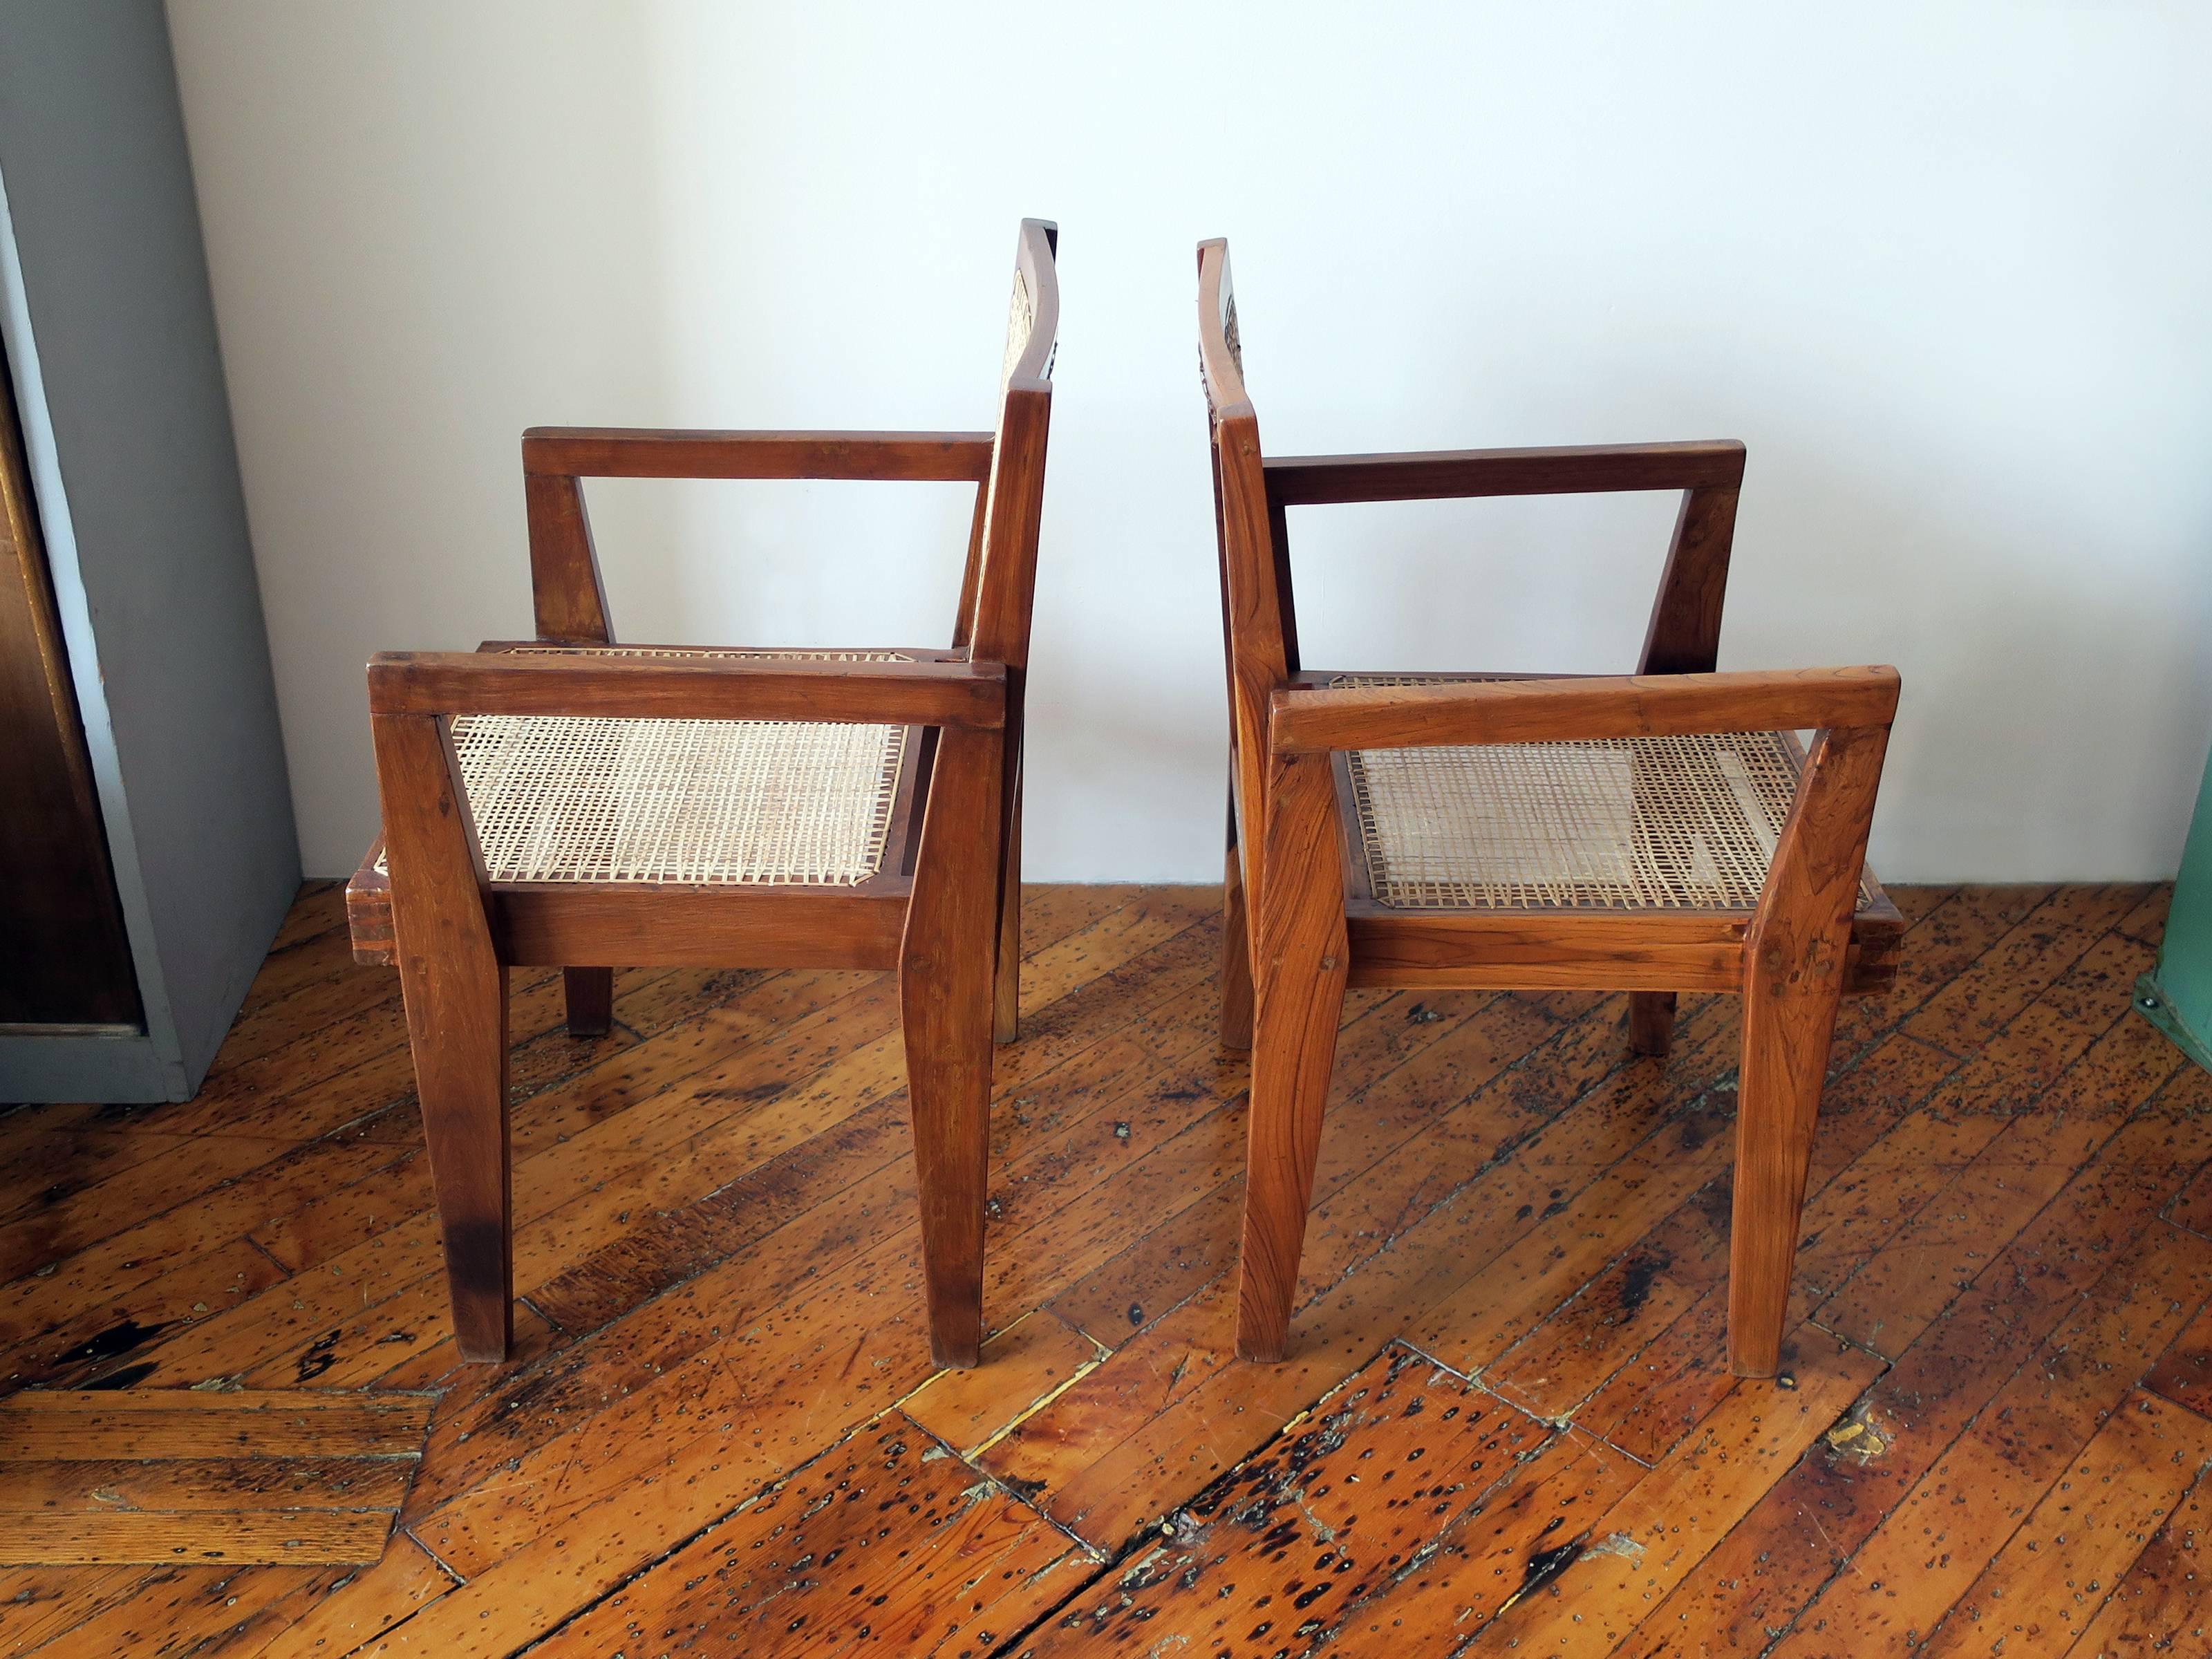 Beautiful pair of a Pierre Jeanneret clerk's armchairs from the high court, Chandigarh. Numbers present on back of chairs. Restored condition. Dimensions vary slightly due to the handmade nature of the design.